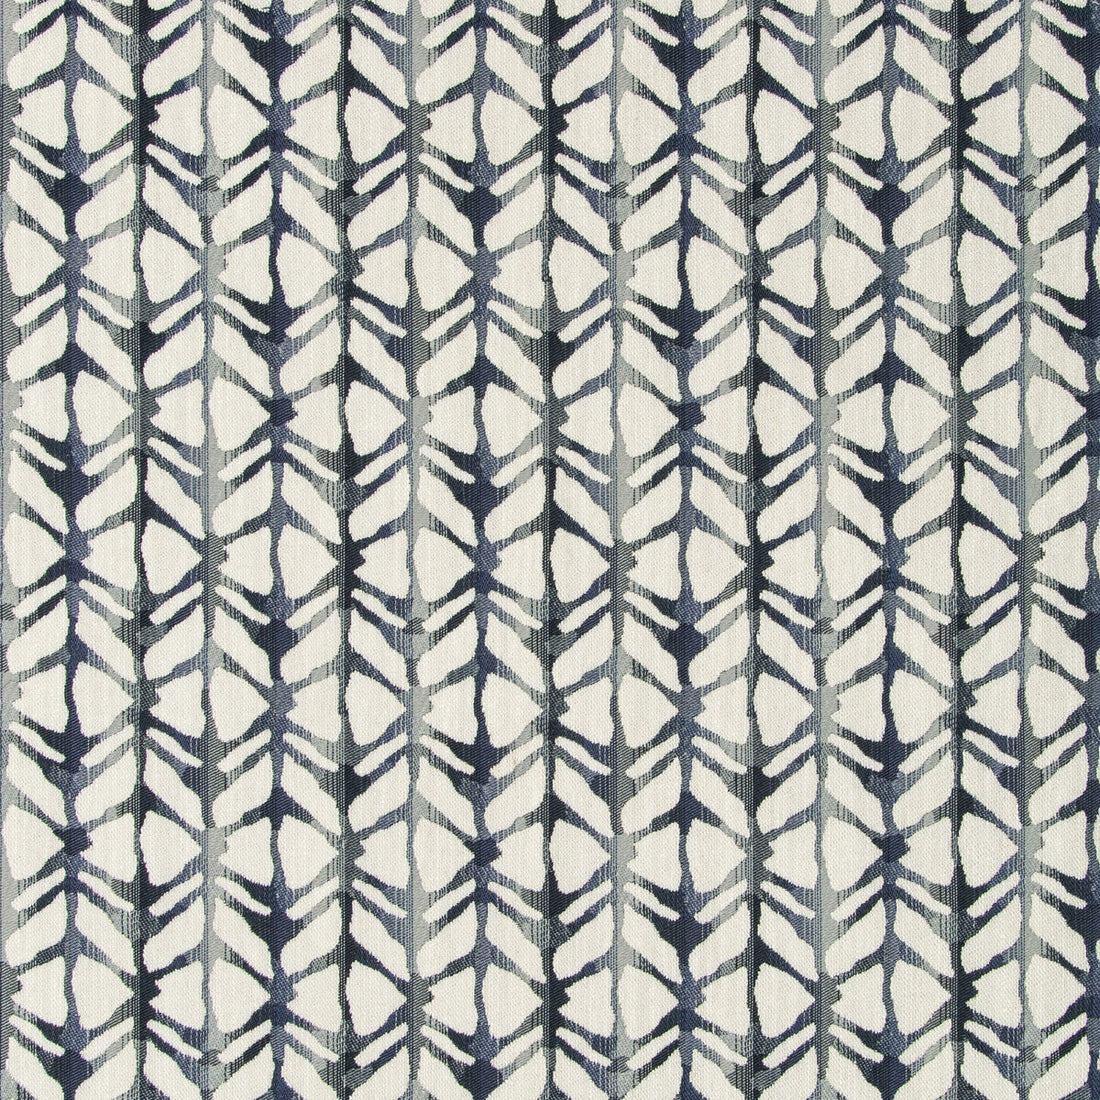 Kravet Design fabric in 35710-51 color - pattern 35710.51.0 - by Kravet Design in the Woven Colors collection